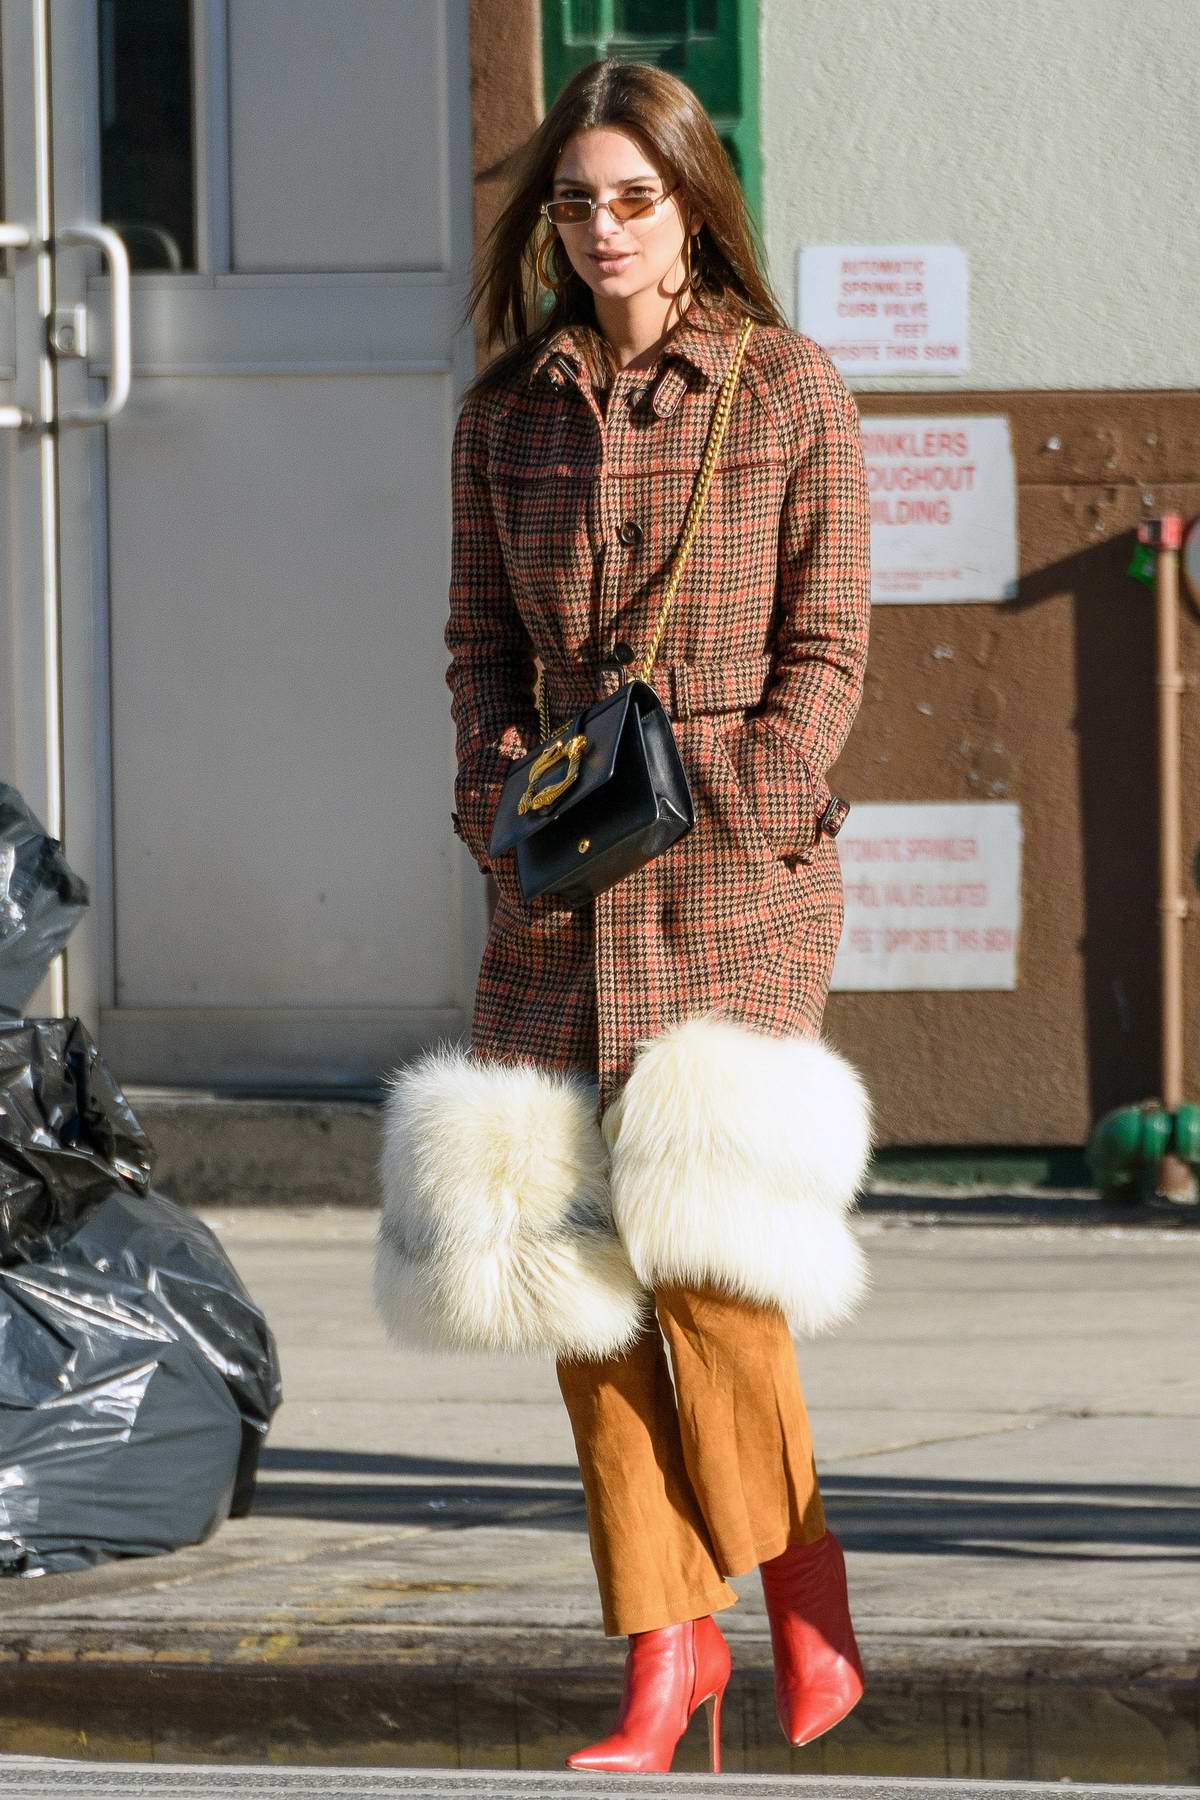 Emily Ratajkowski dressed in a stylish fur trimmed plaid jacket with red boots, spotted out with